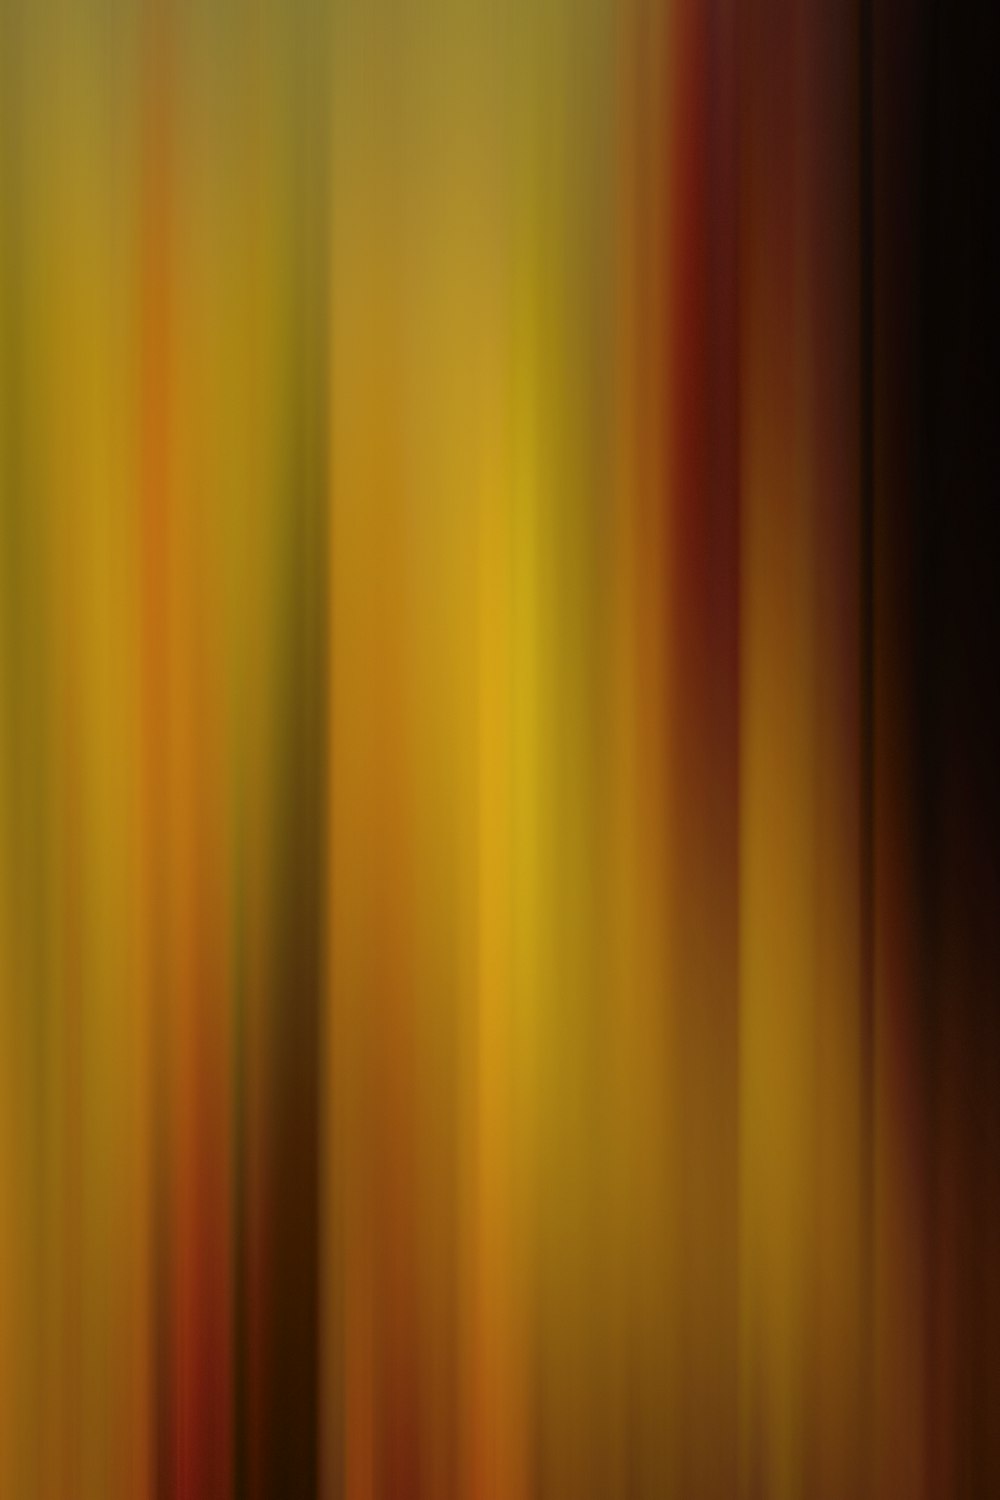 a blurry image of a yellow and red background